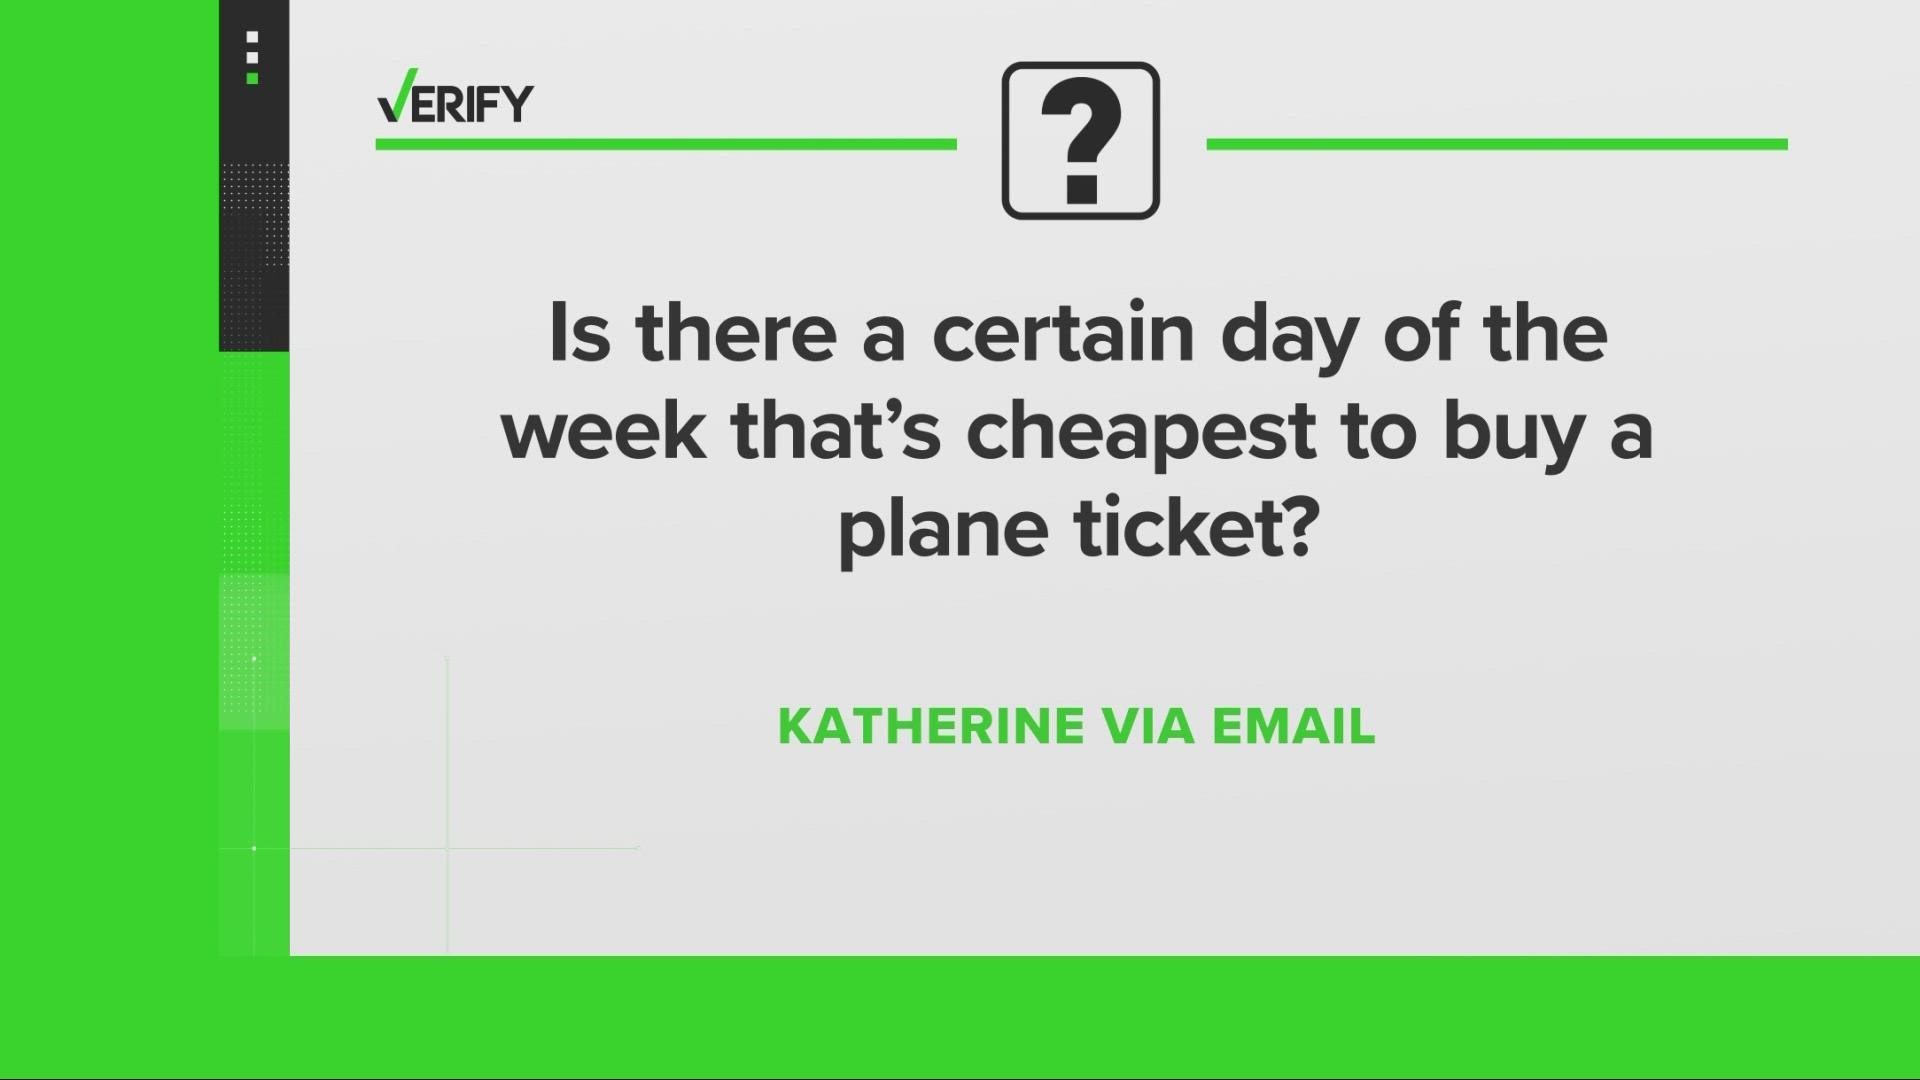 It’s a myth that the best day to buy a plane ticket is on Tuesday. Our VERIFY team digs into the claims.